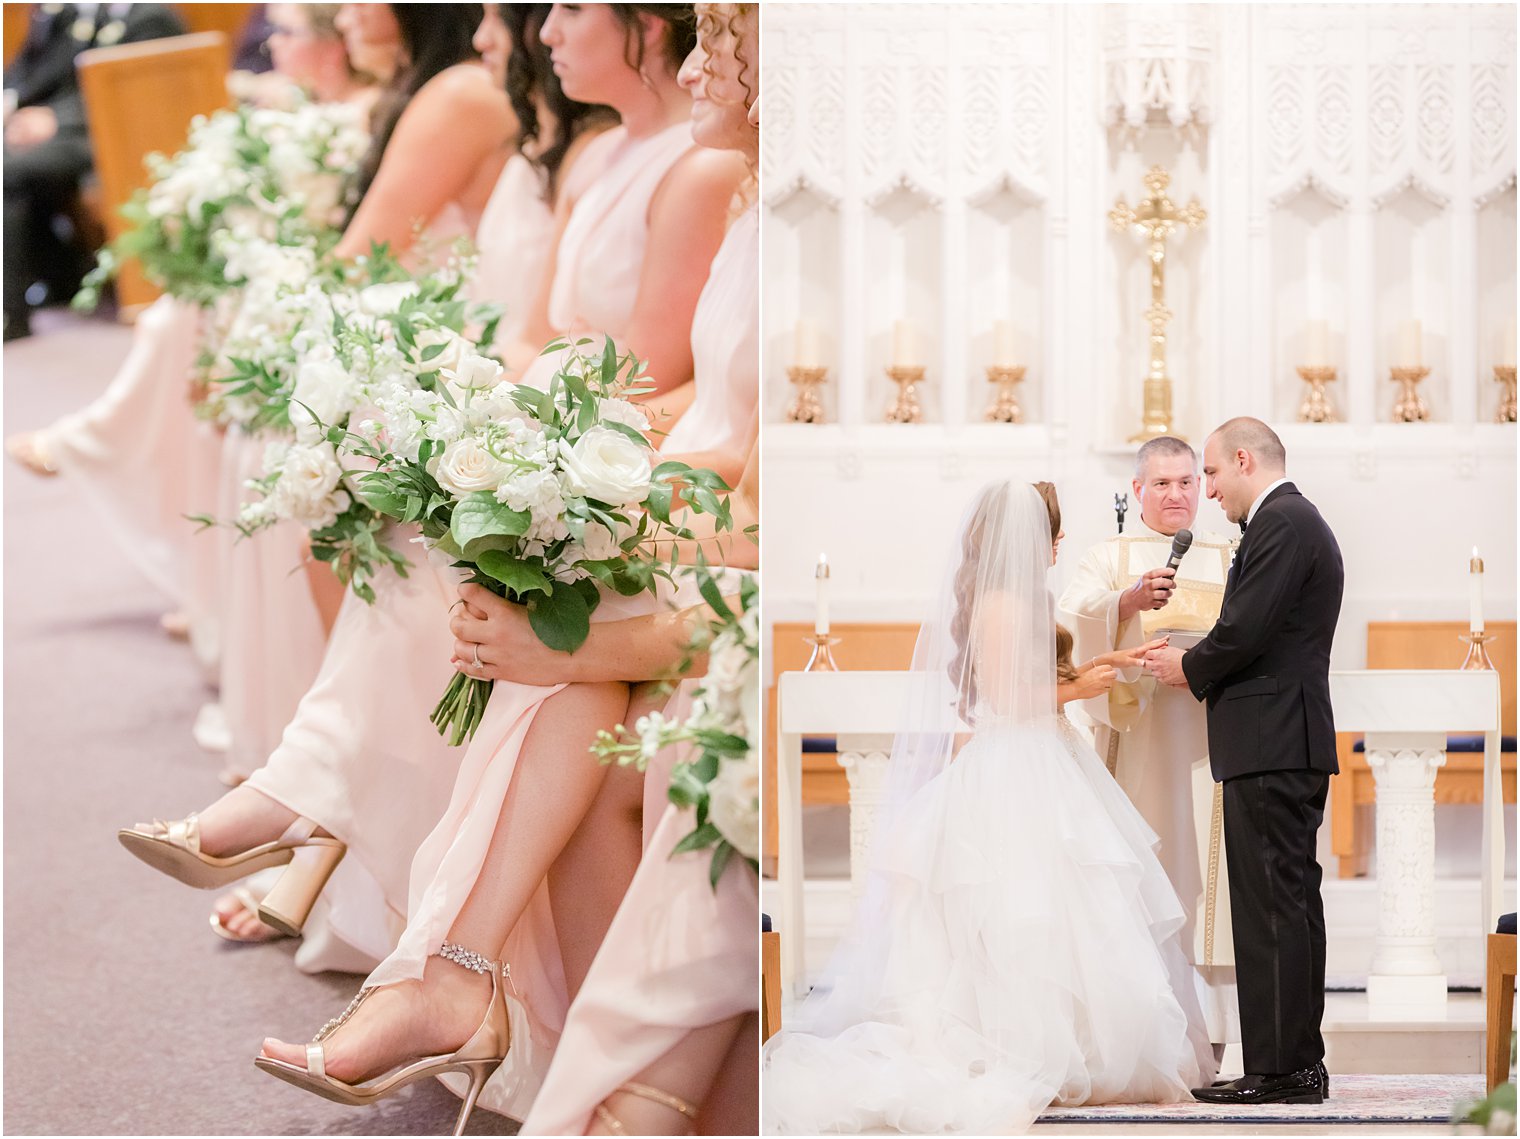 Wedding ceremony at St. Peter the Apostle in New Brunswick NJ